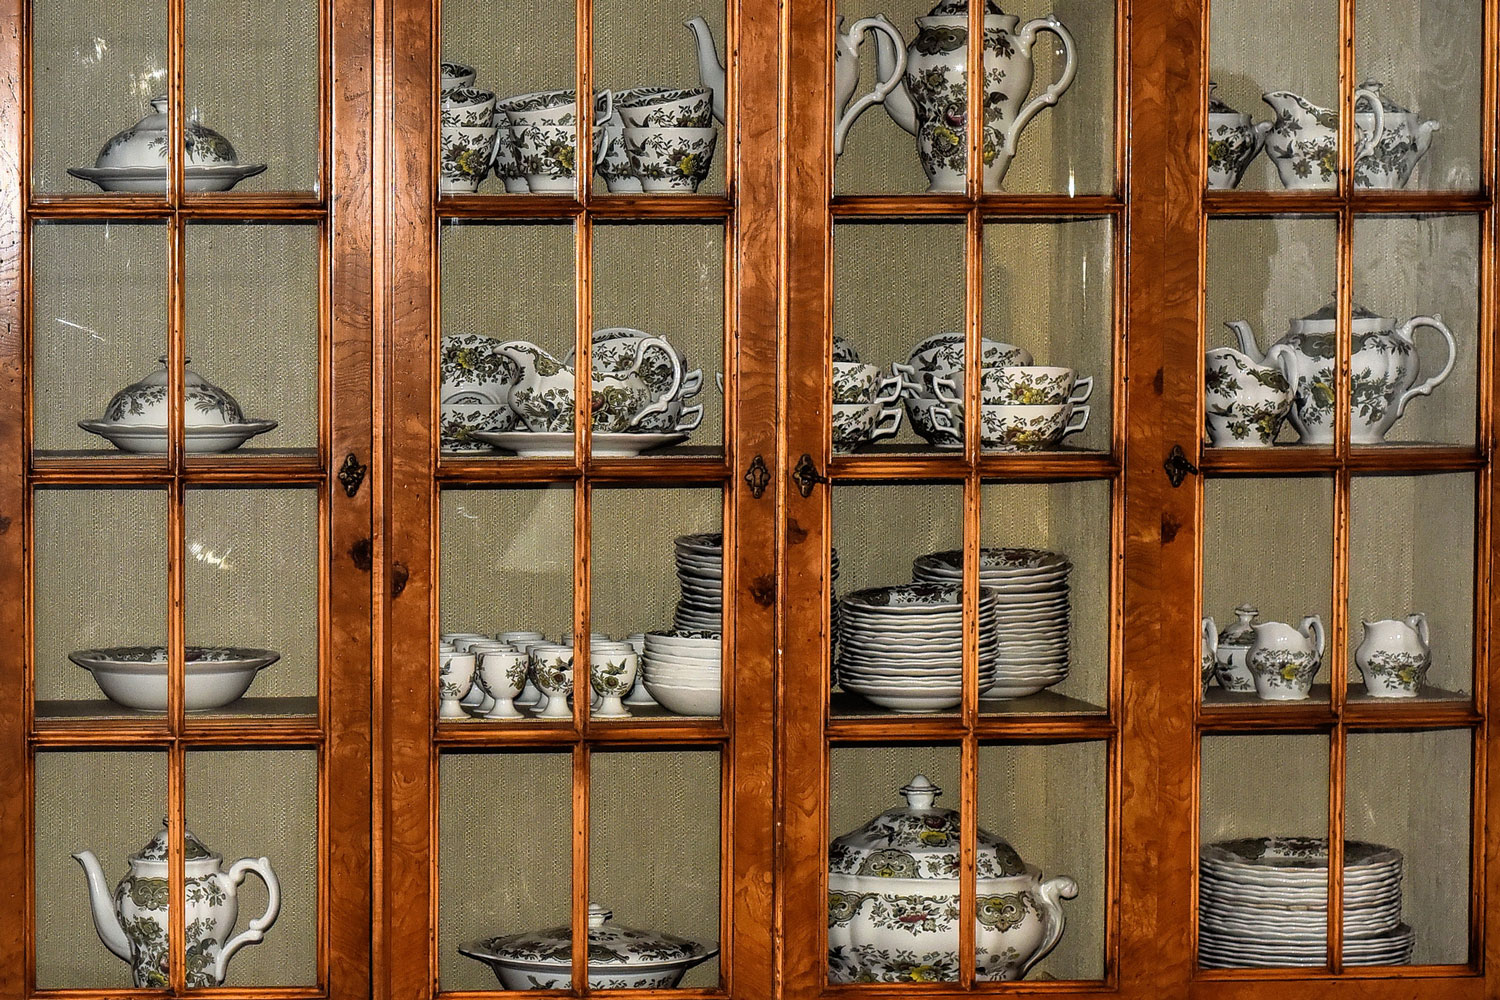 A huge China cabinet filled with China utensils